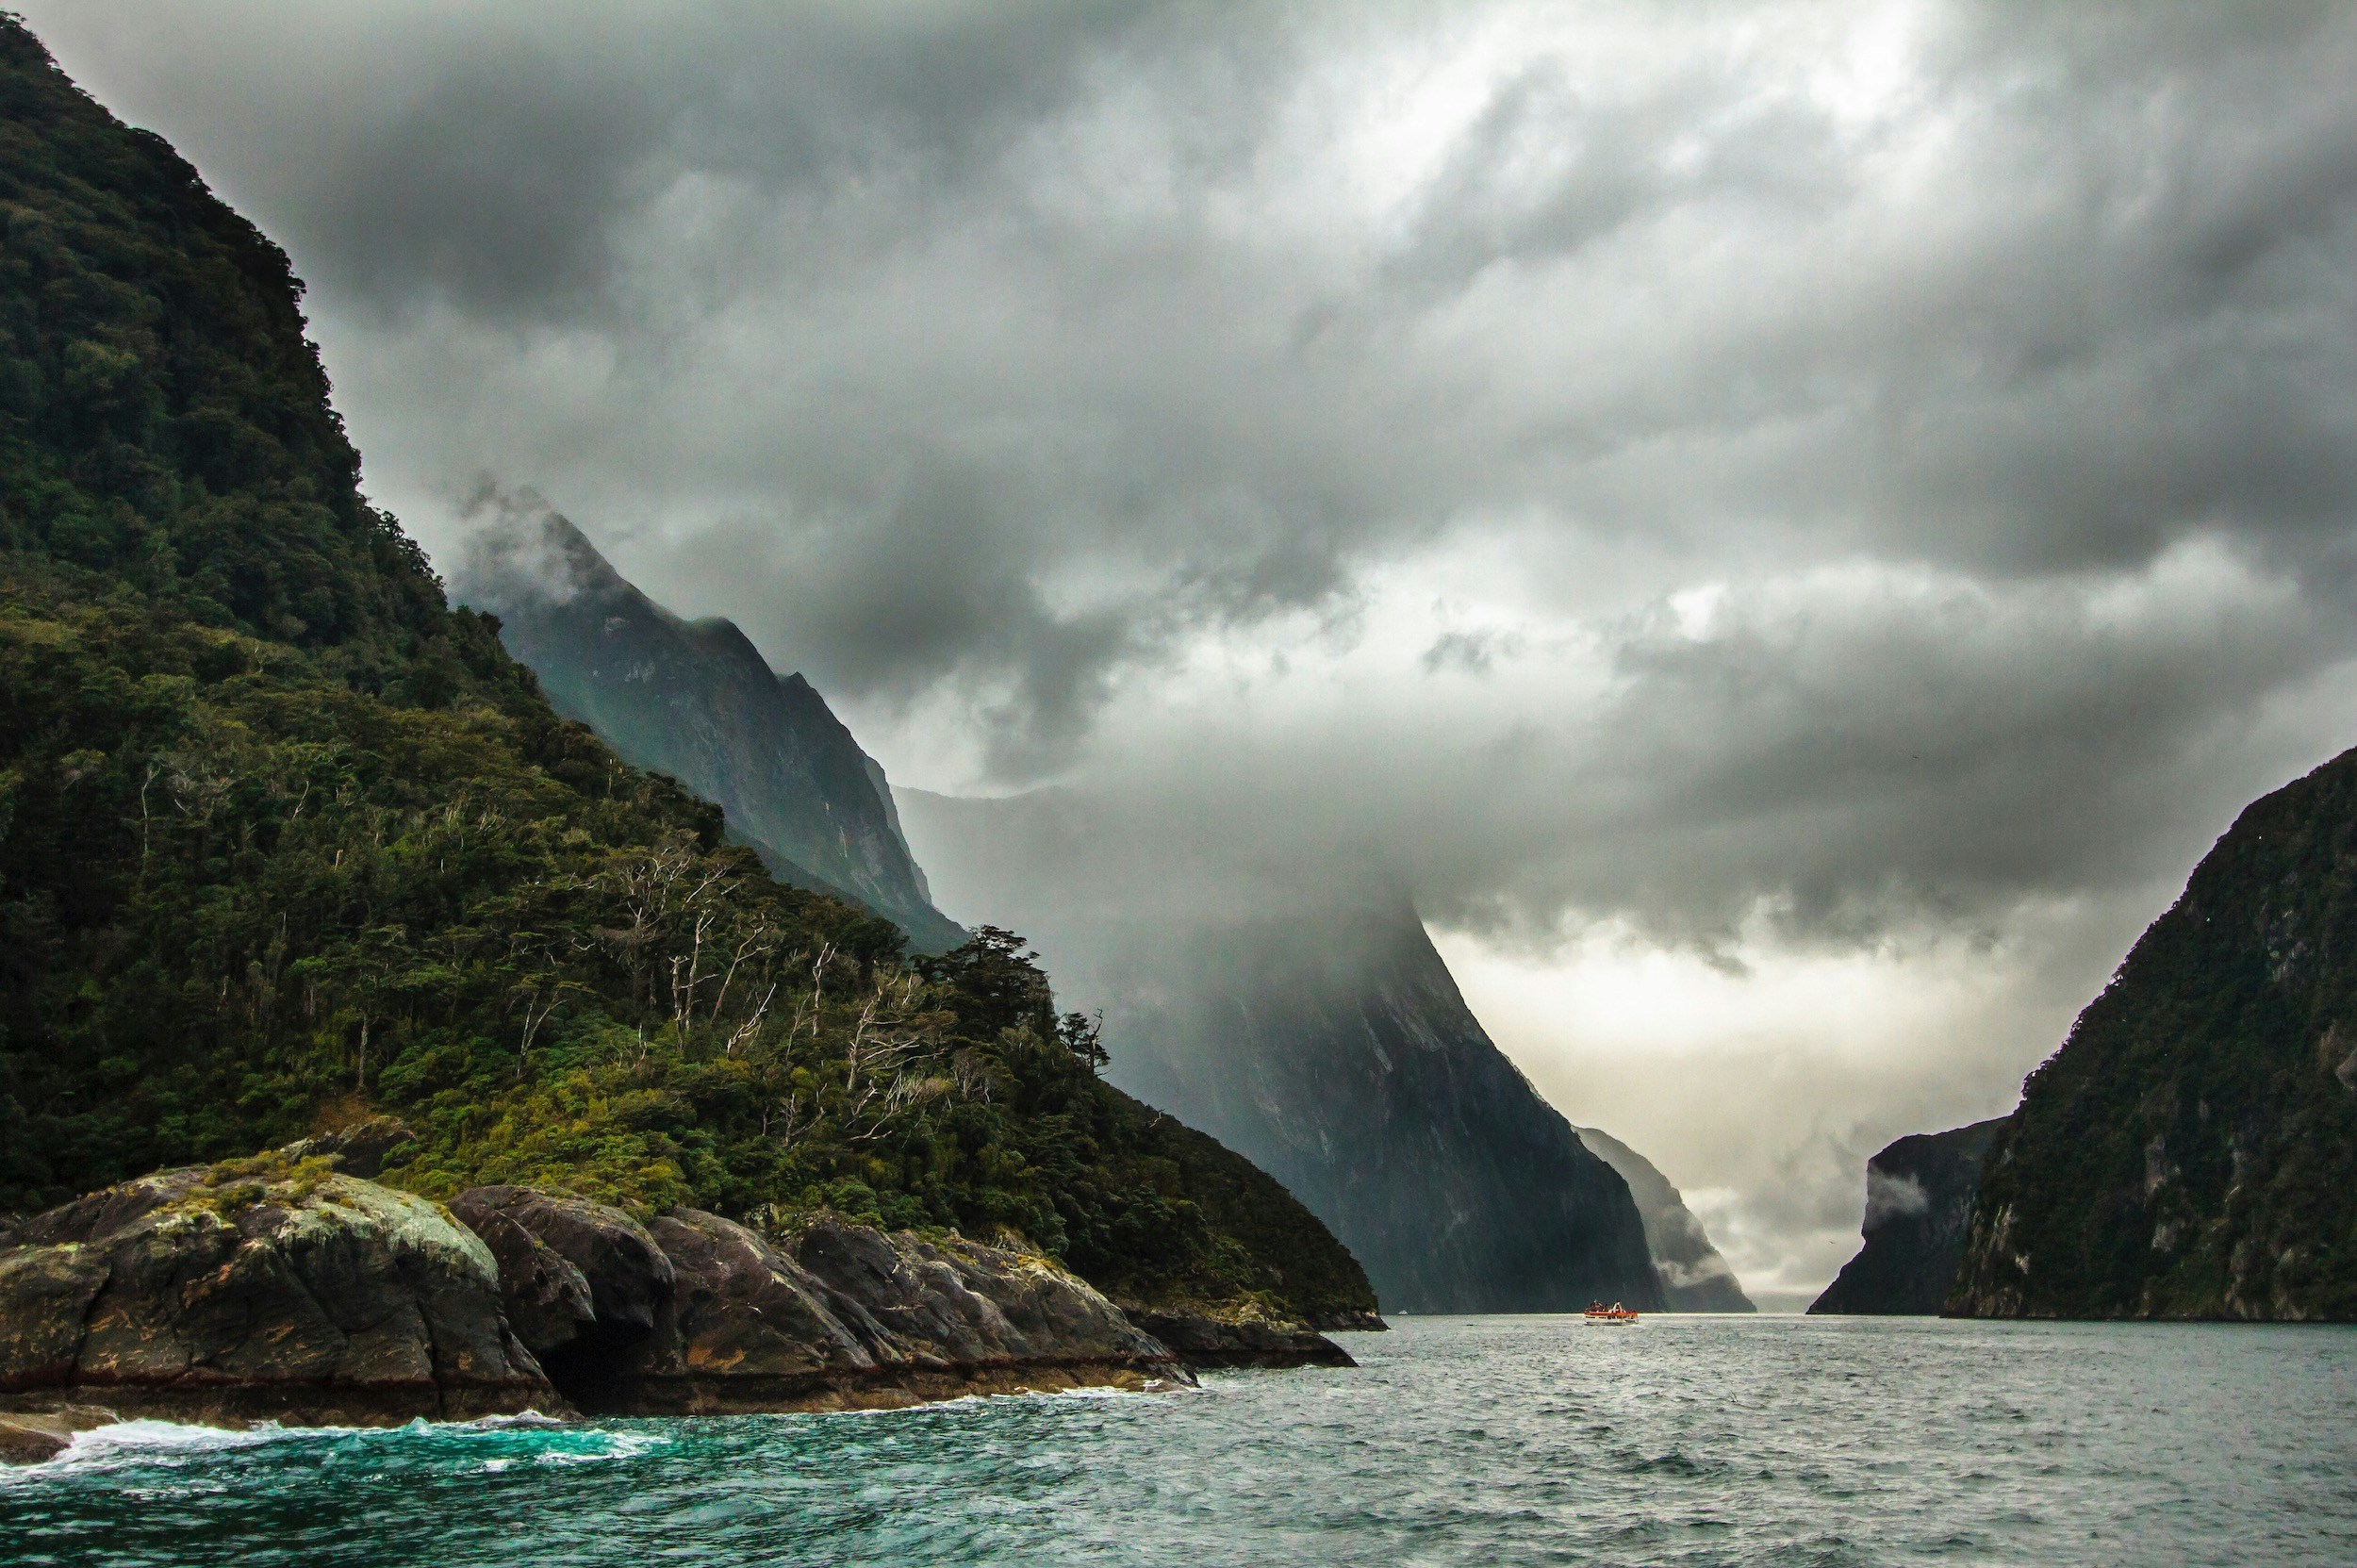 discover the stunning beauty of fjords - a must-see natural wonder with its sheer cliffs and tranquil waters.